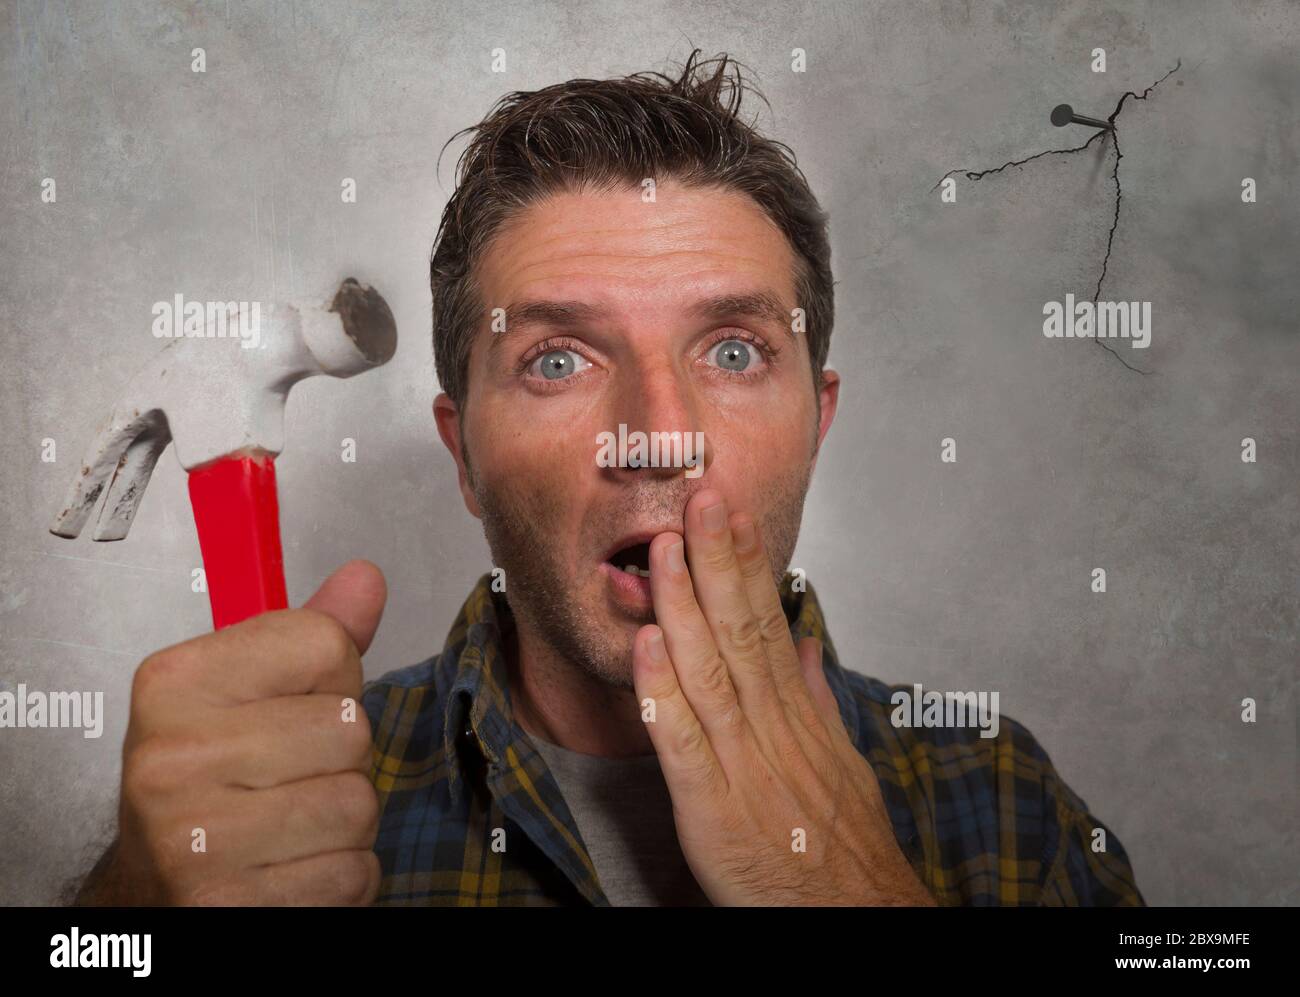 funny portrait of man holding hammer driving a nail for hanging a frame but making a mess cracking the wall as a disaster DIY guy and messy domestic r Stock Photo